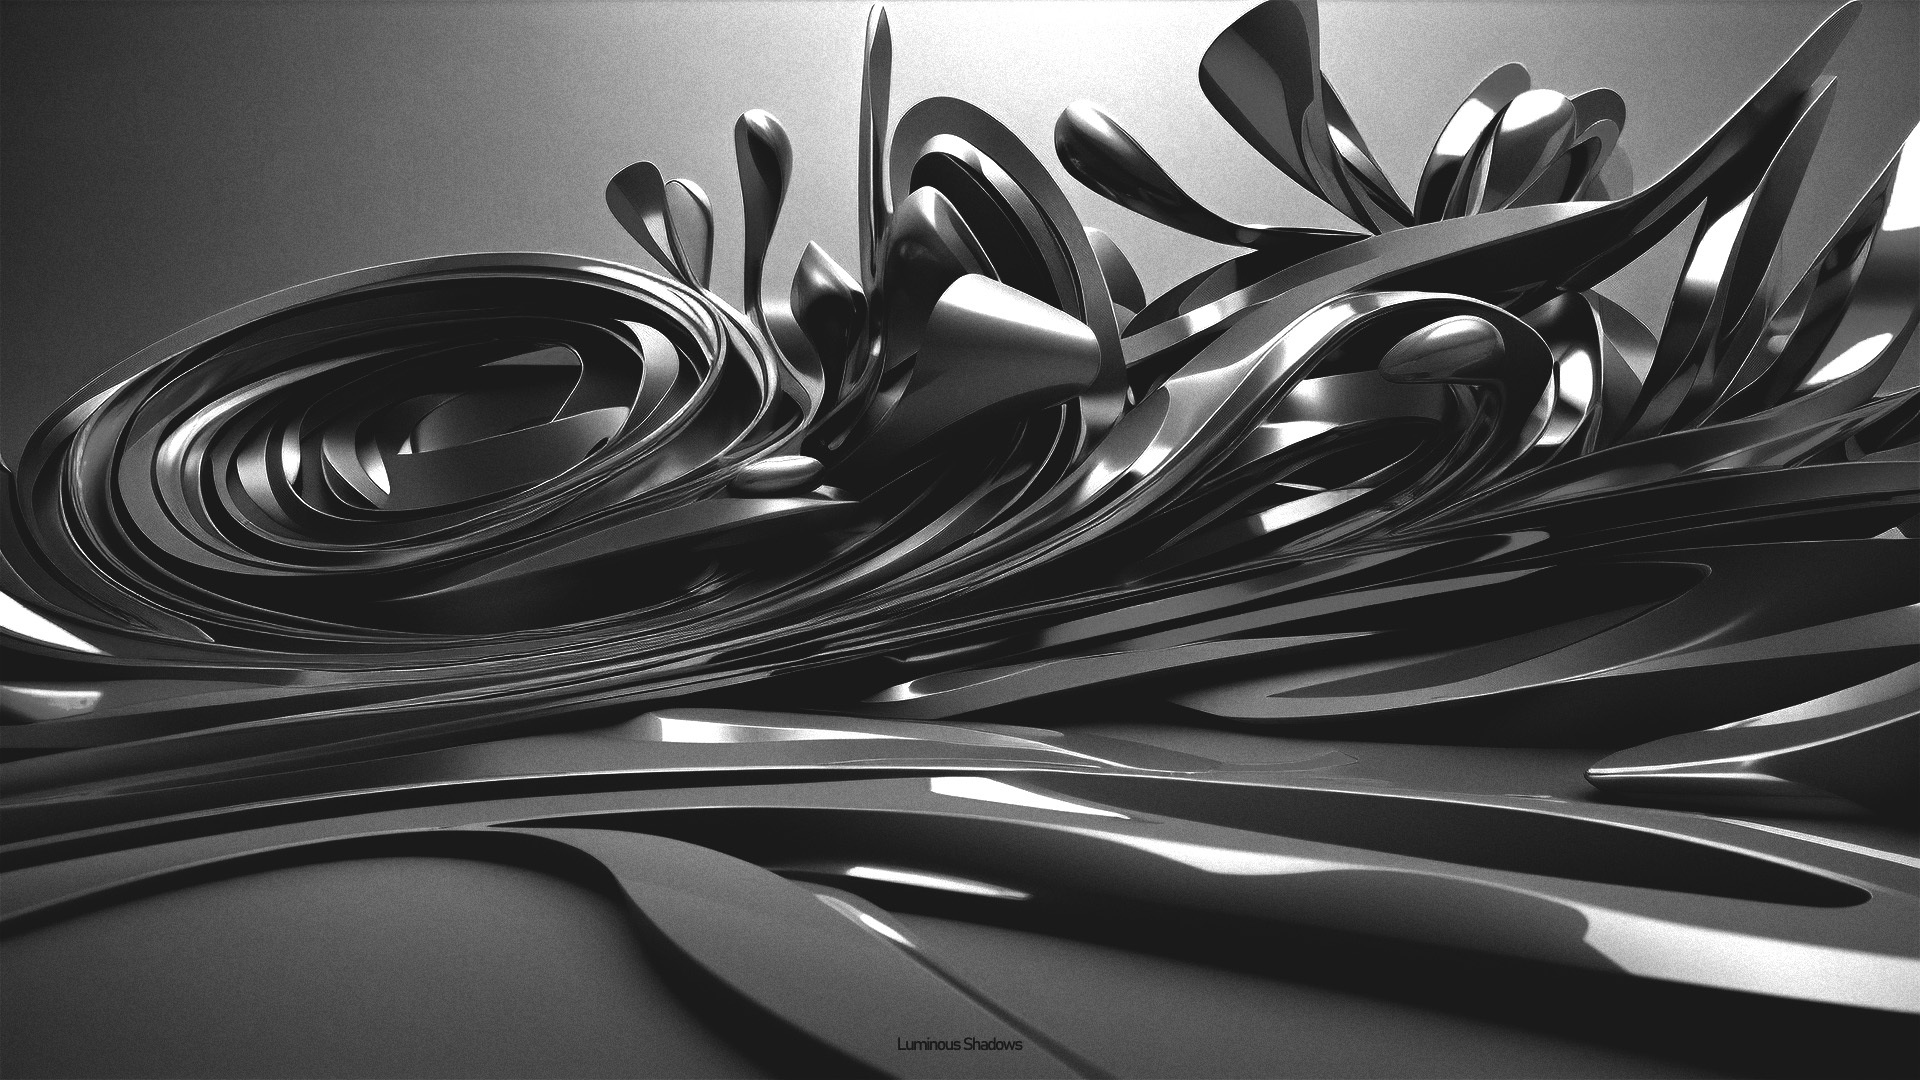 General 1920x1080 minimalism abstract 3D Abstract monochrome simple background CGI digital art